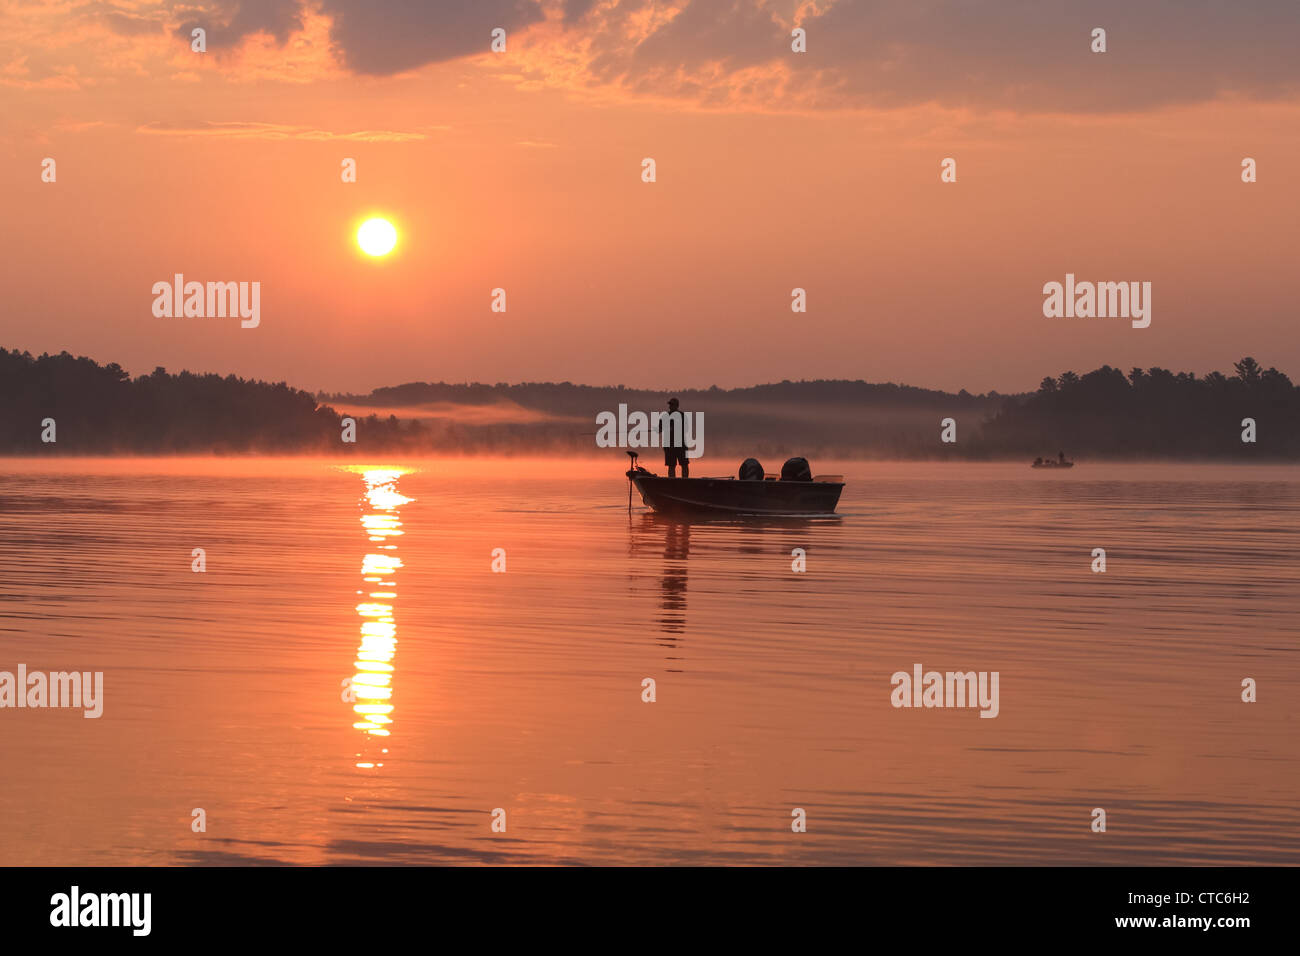 Fisherman in a boat silhouetted against a rising sun. Stock Photo